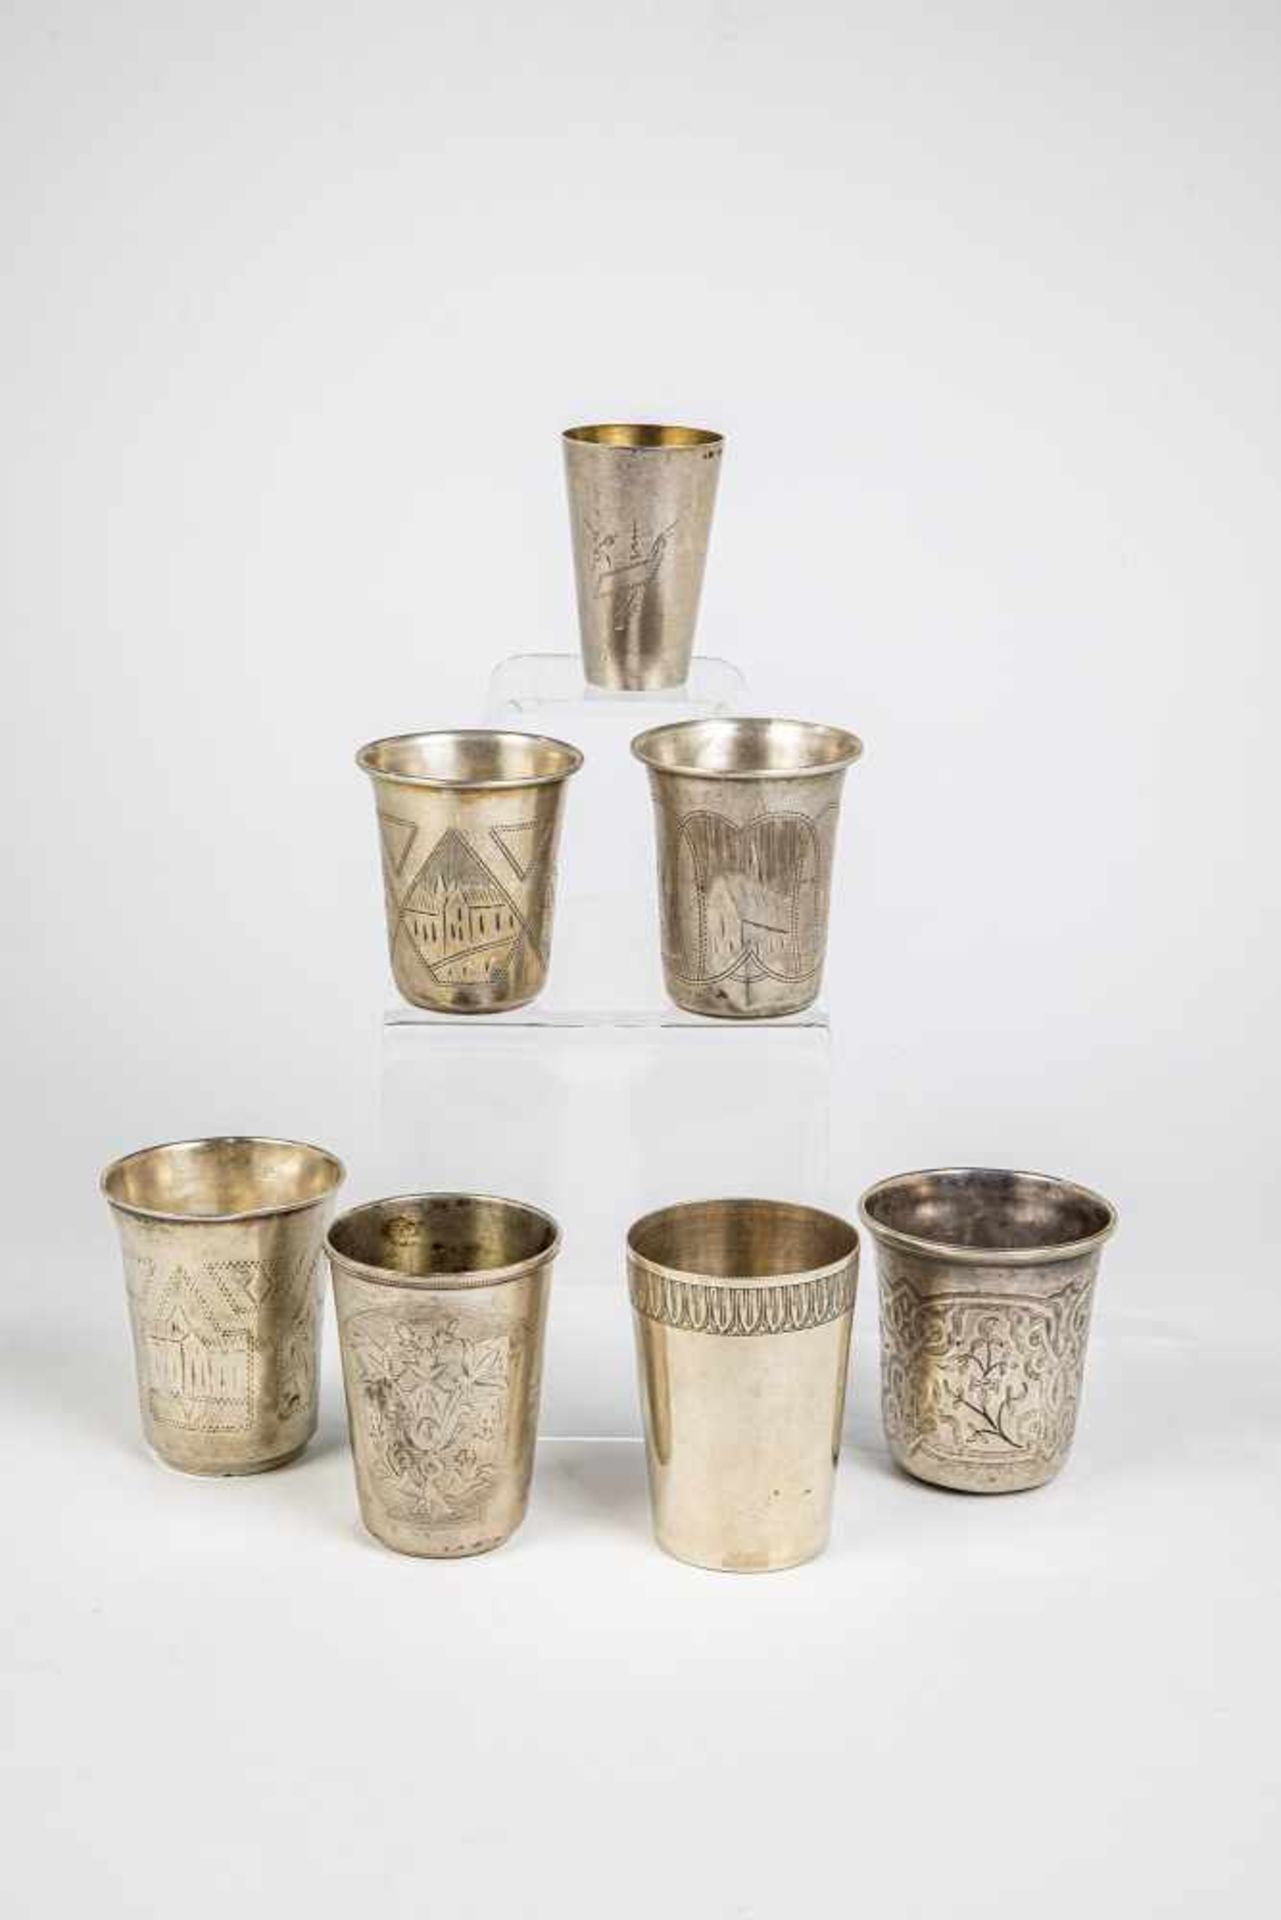 Seven silver beakers. Russia, 1857 (one), 1896-1908 (two), 1908-1917 (two)/ Soviet Union,1927-